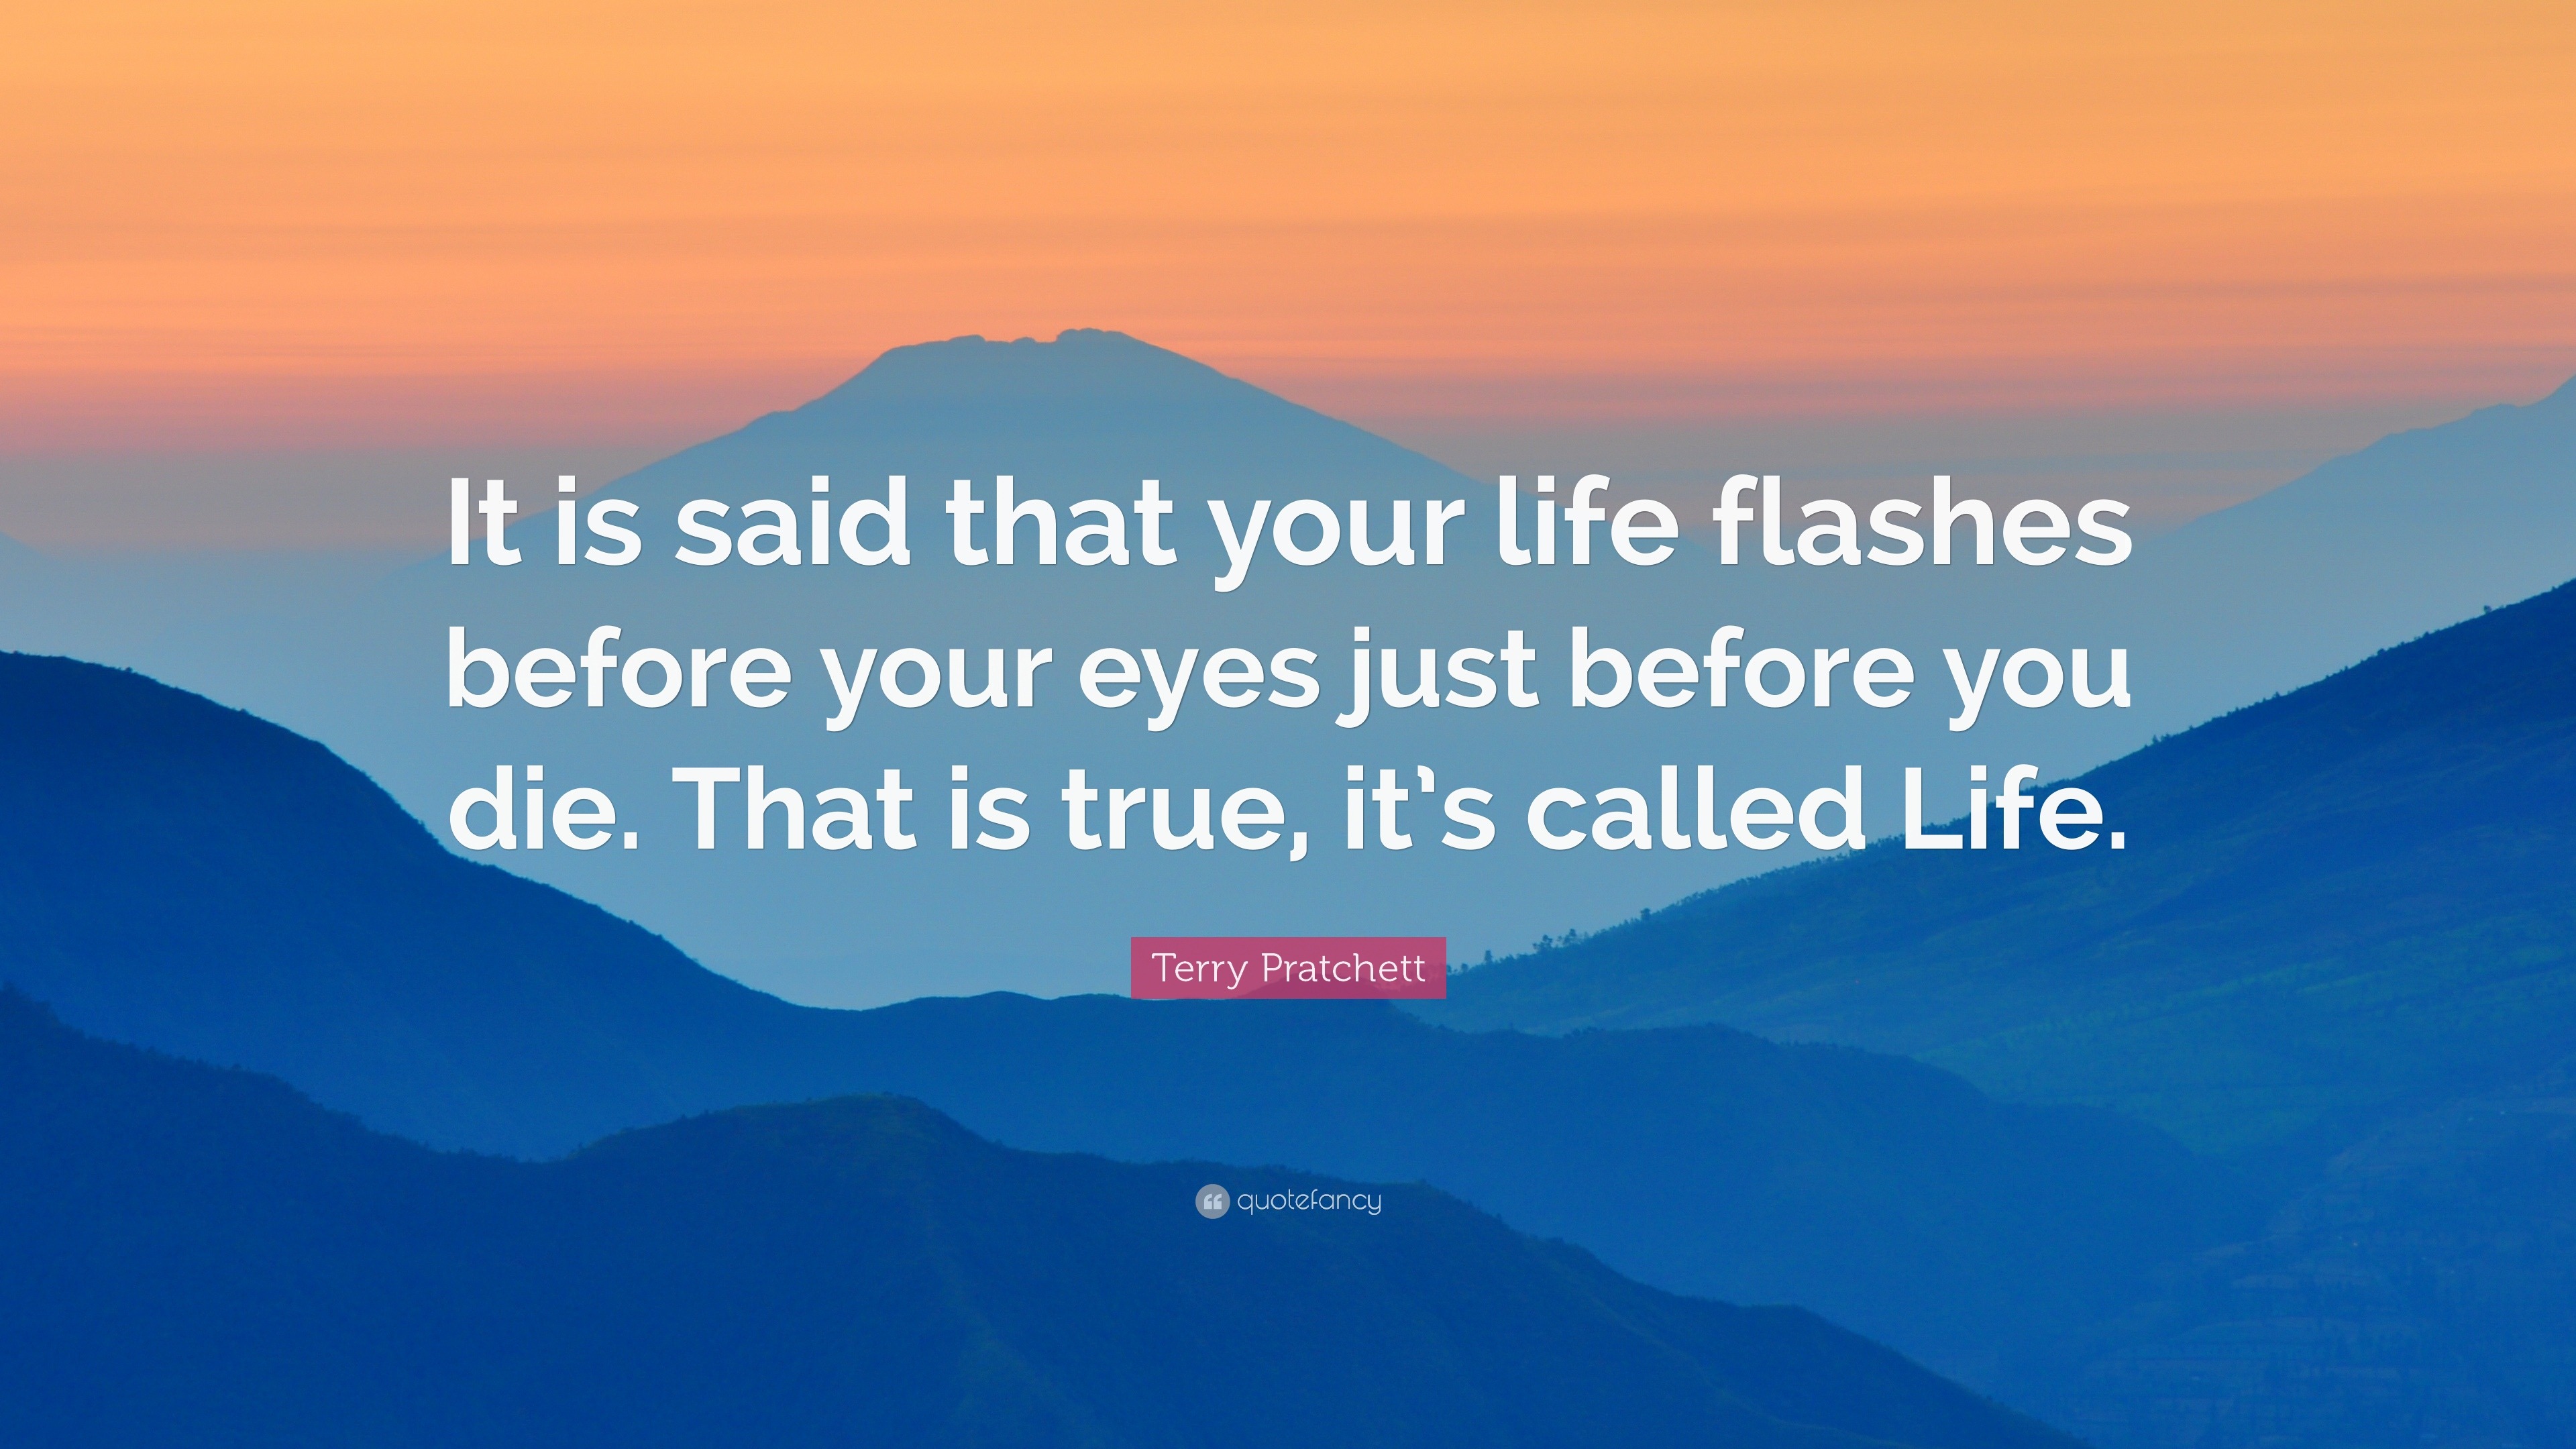 life suggests flash before your eyes